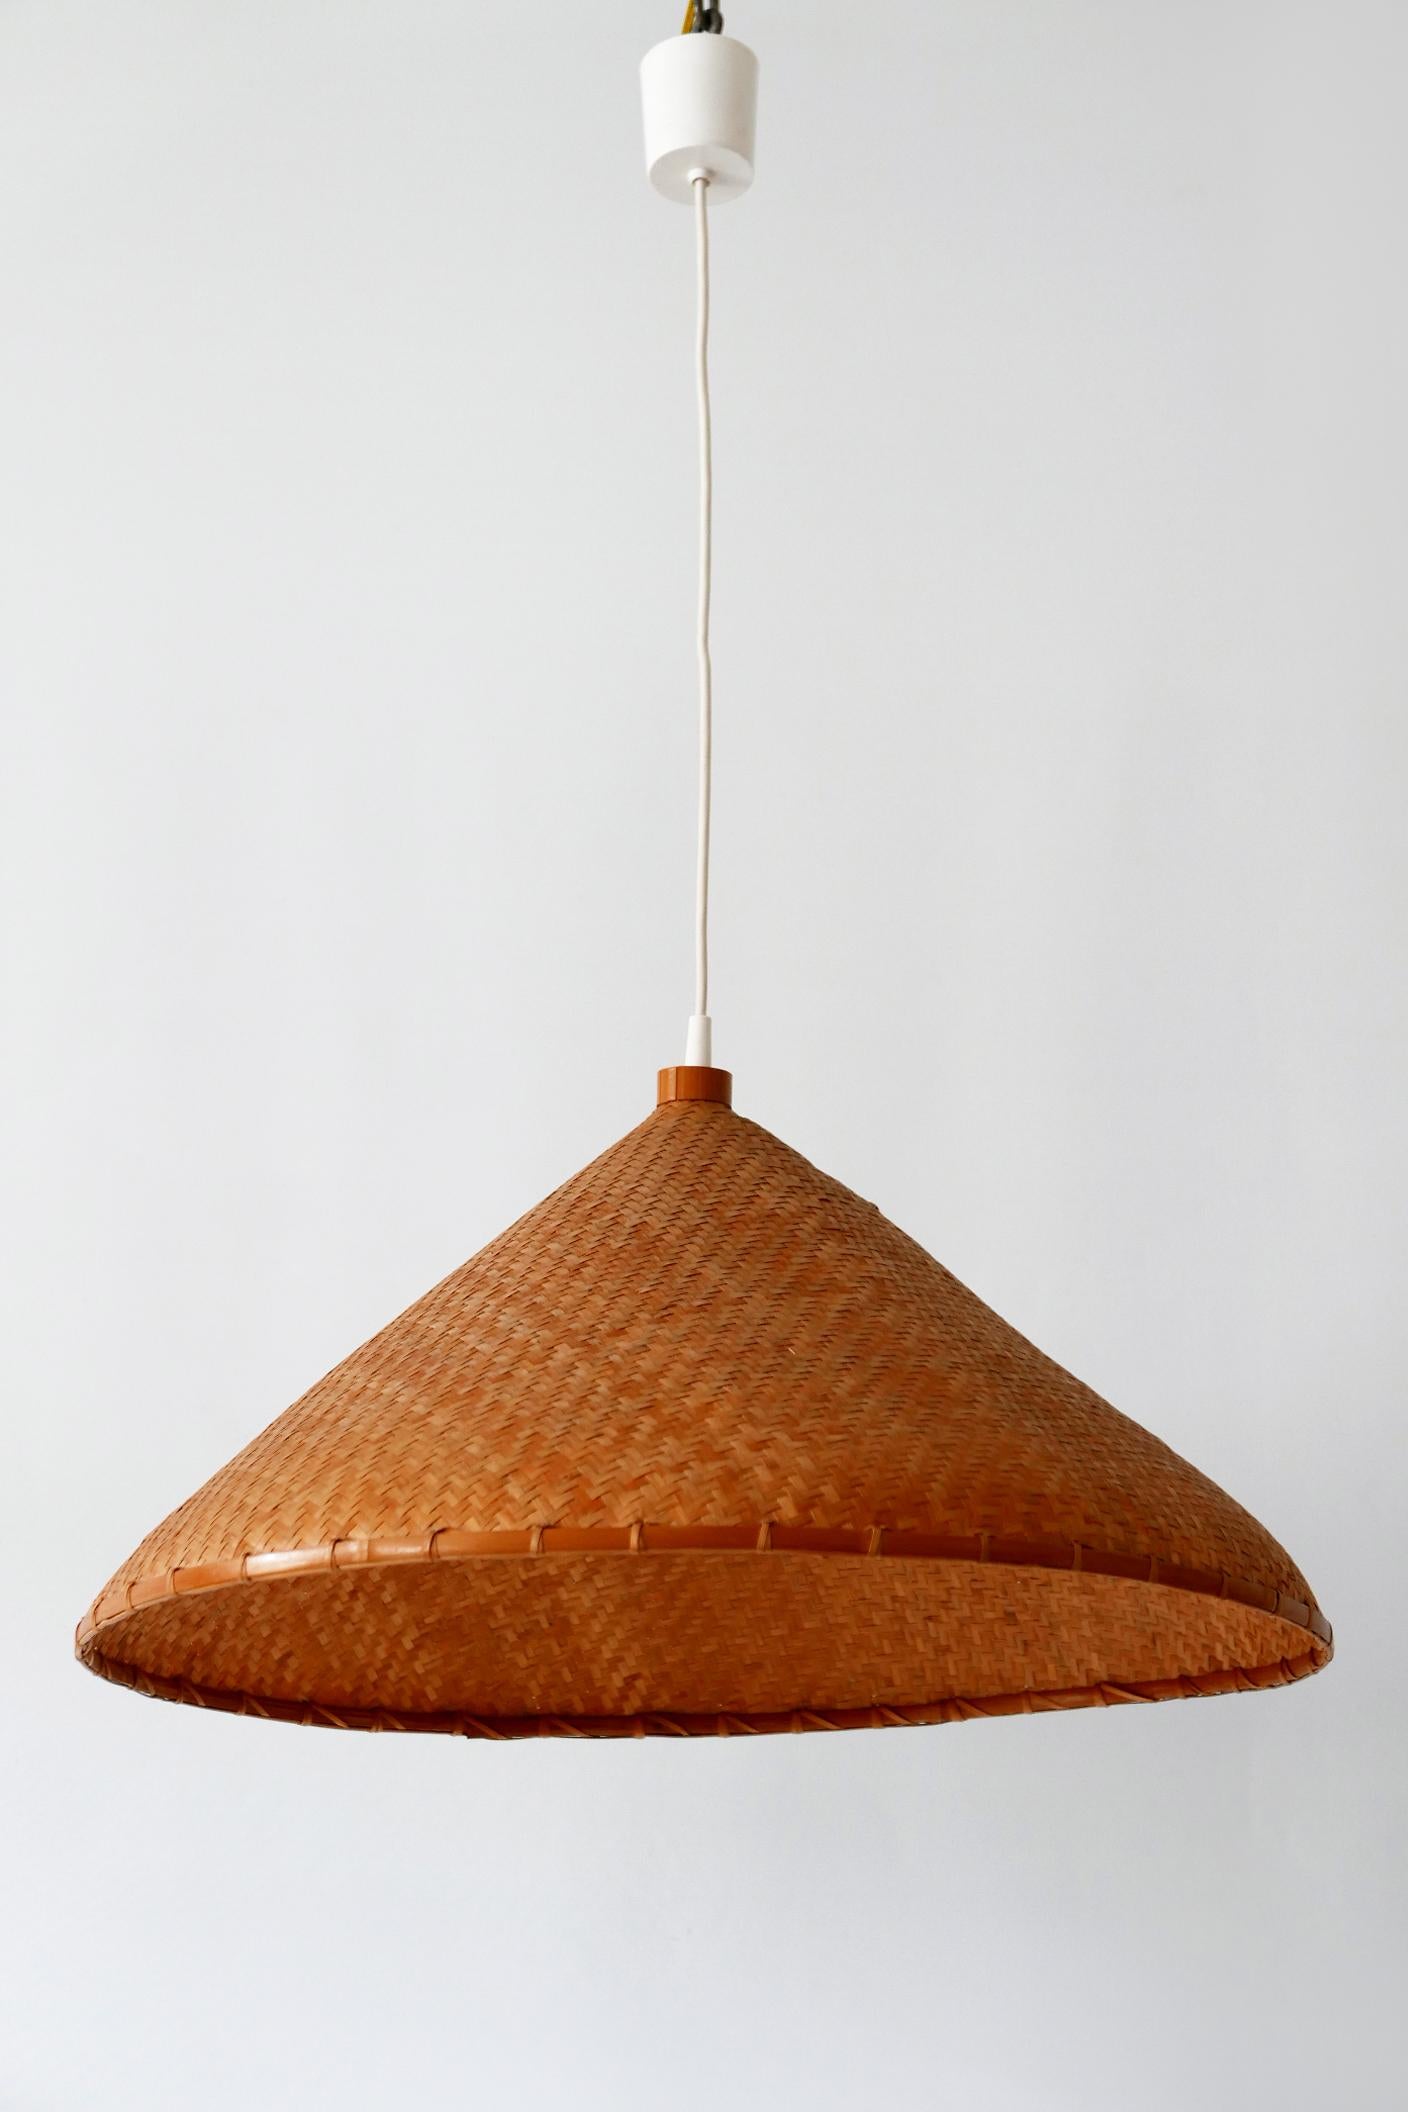 Large Mid-Century Modern Wicker Pendant Lamp or Hanging Light, Germany, 1960s For Sale 6